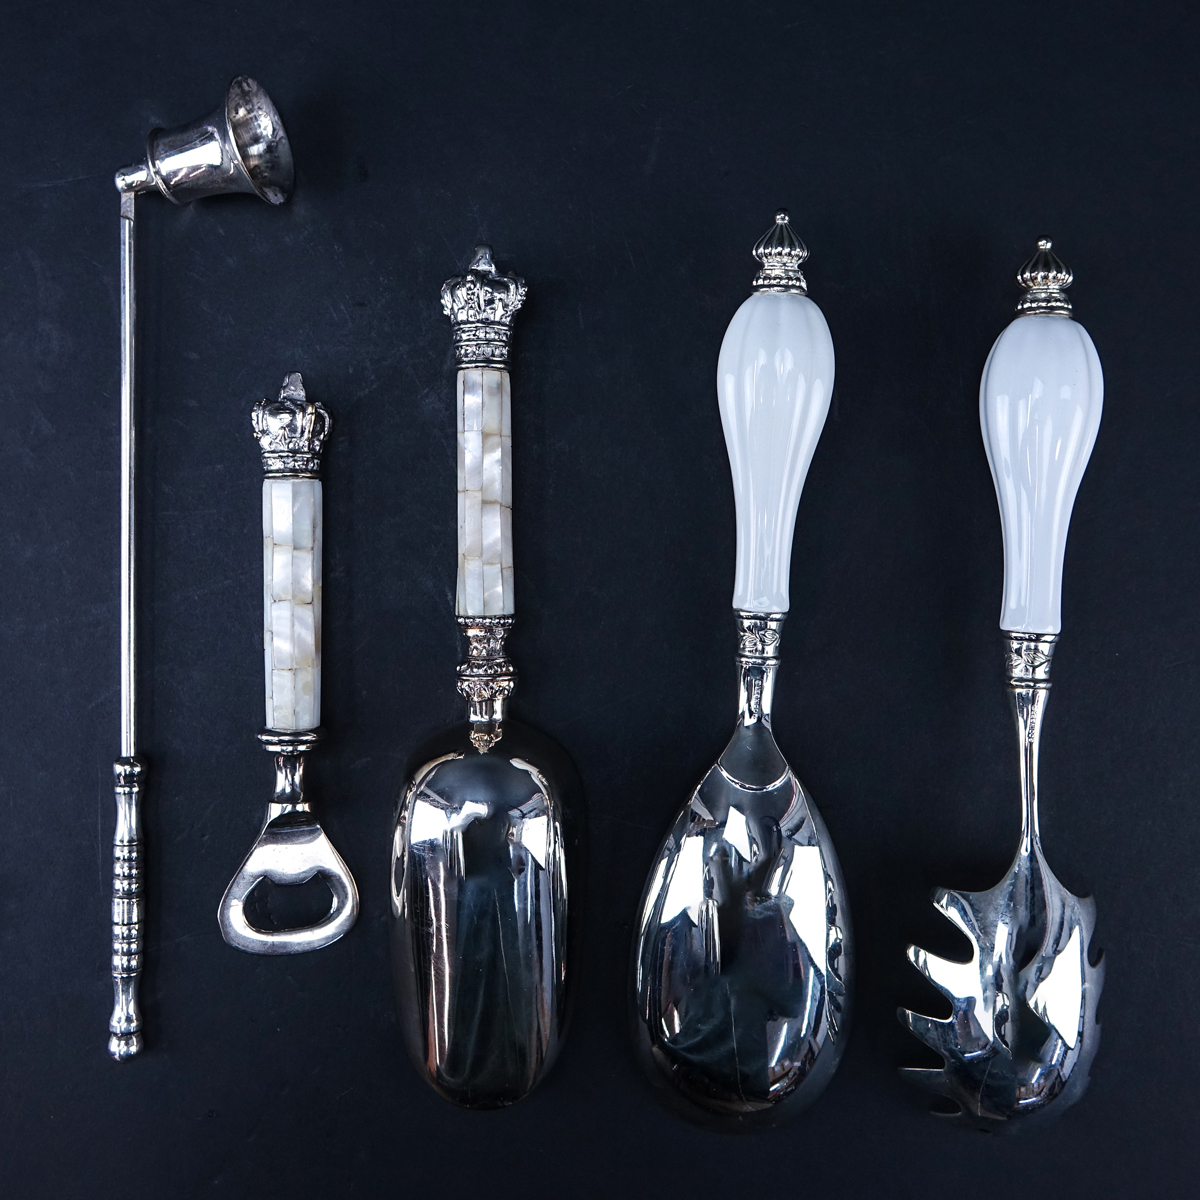 Collection of Five (5) Vintage Serving Pieces. Includes: Mother Of pearl Handled scoop and bottle opener, porcelain handled casserole spoon and past server, candle snuffer.